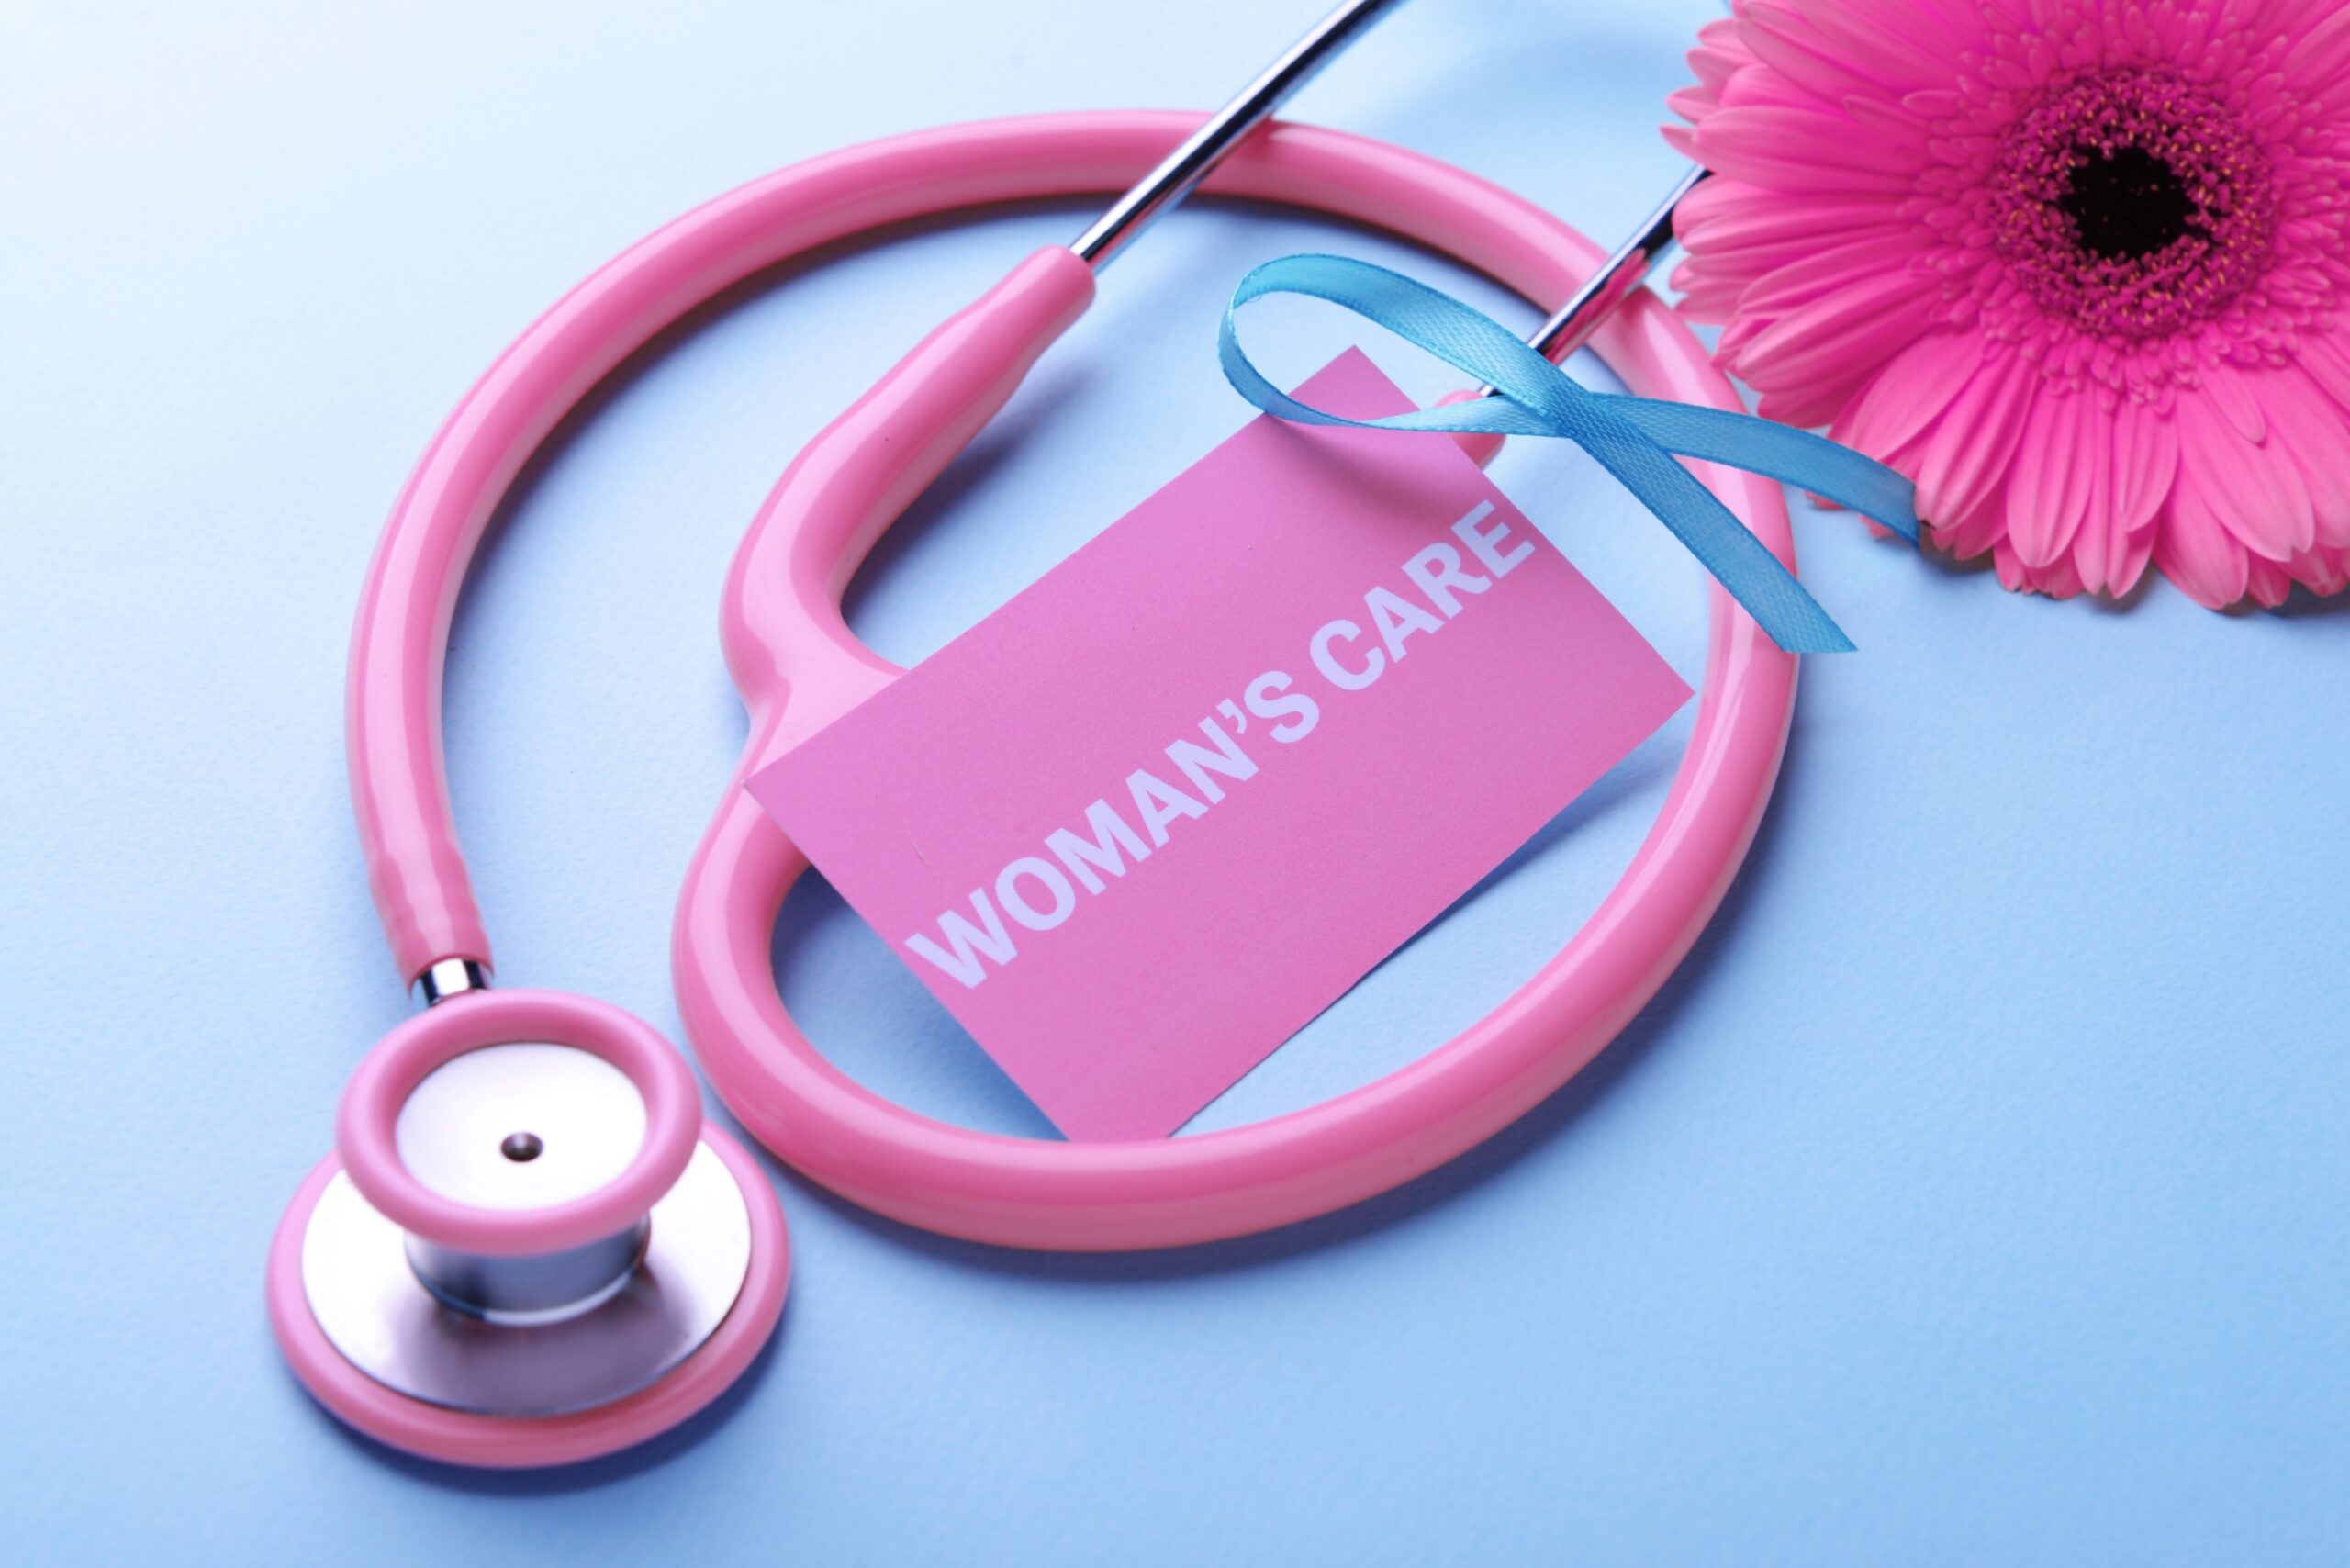 Are More Women Choosing Personalized Medicine?